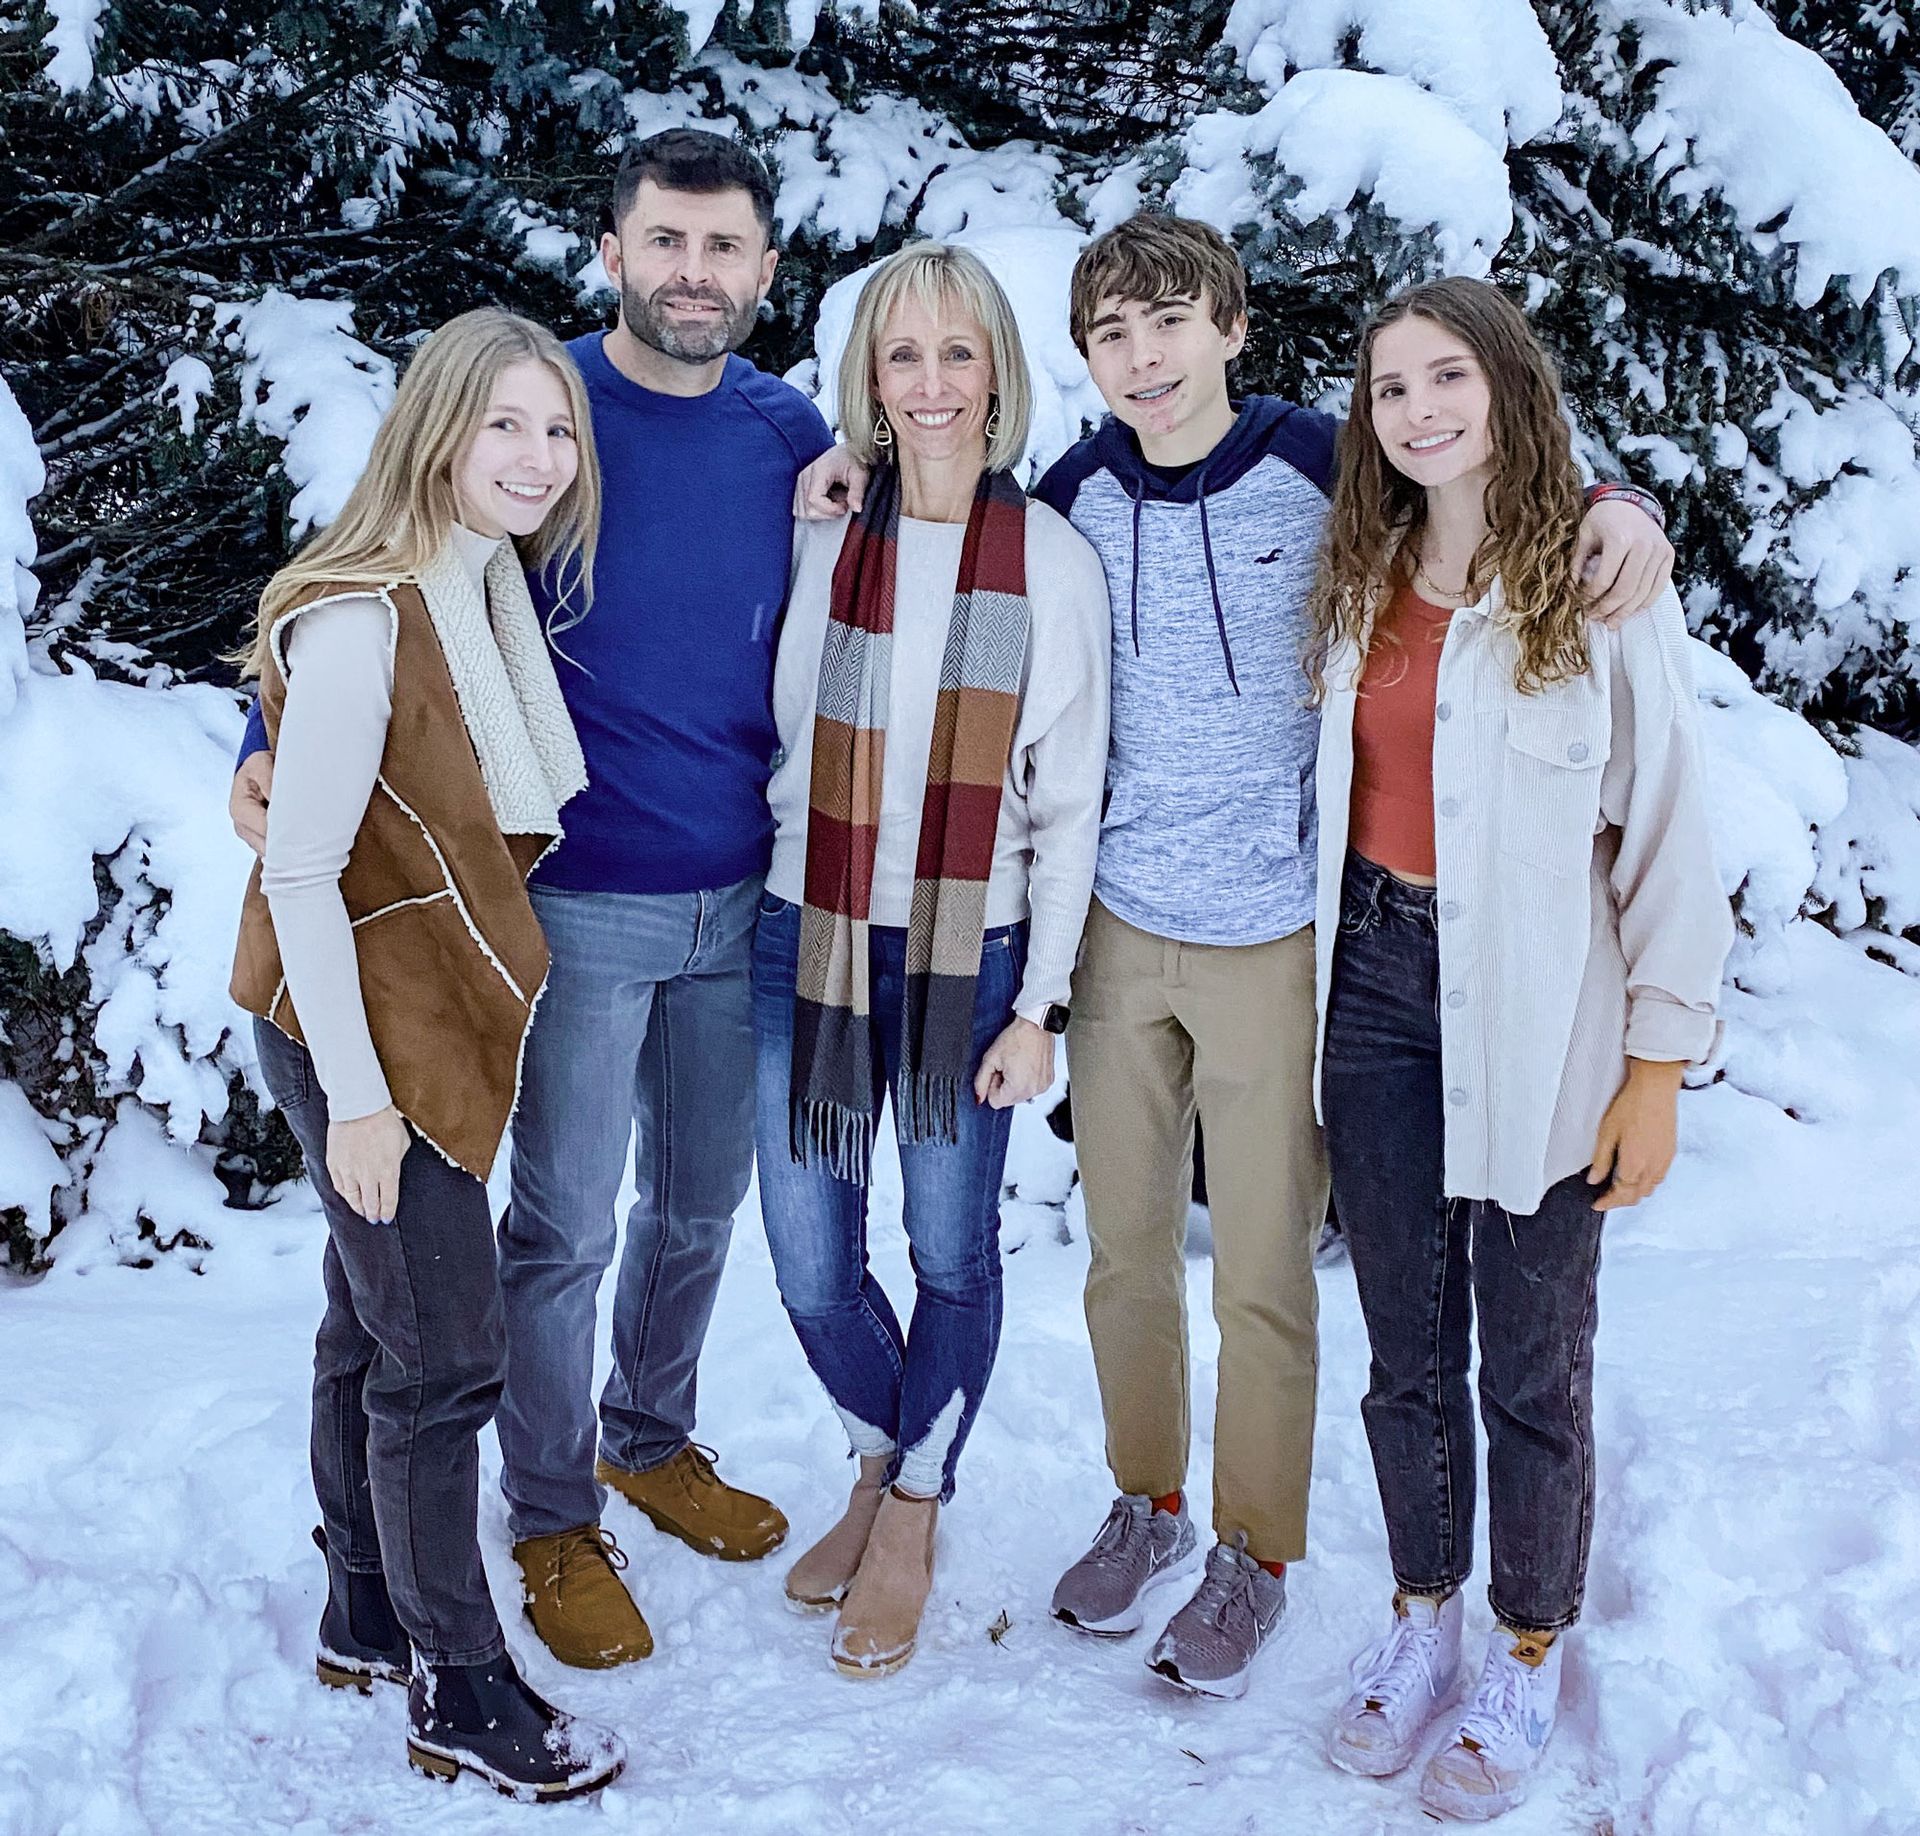 Family photo of the Wolfrath family standing in front of snowy trees